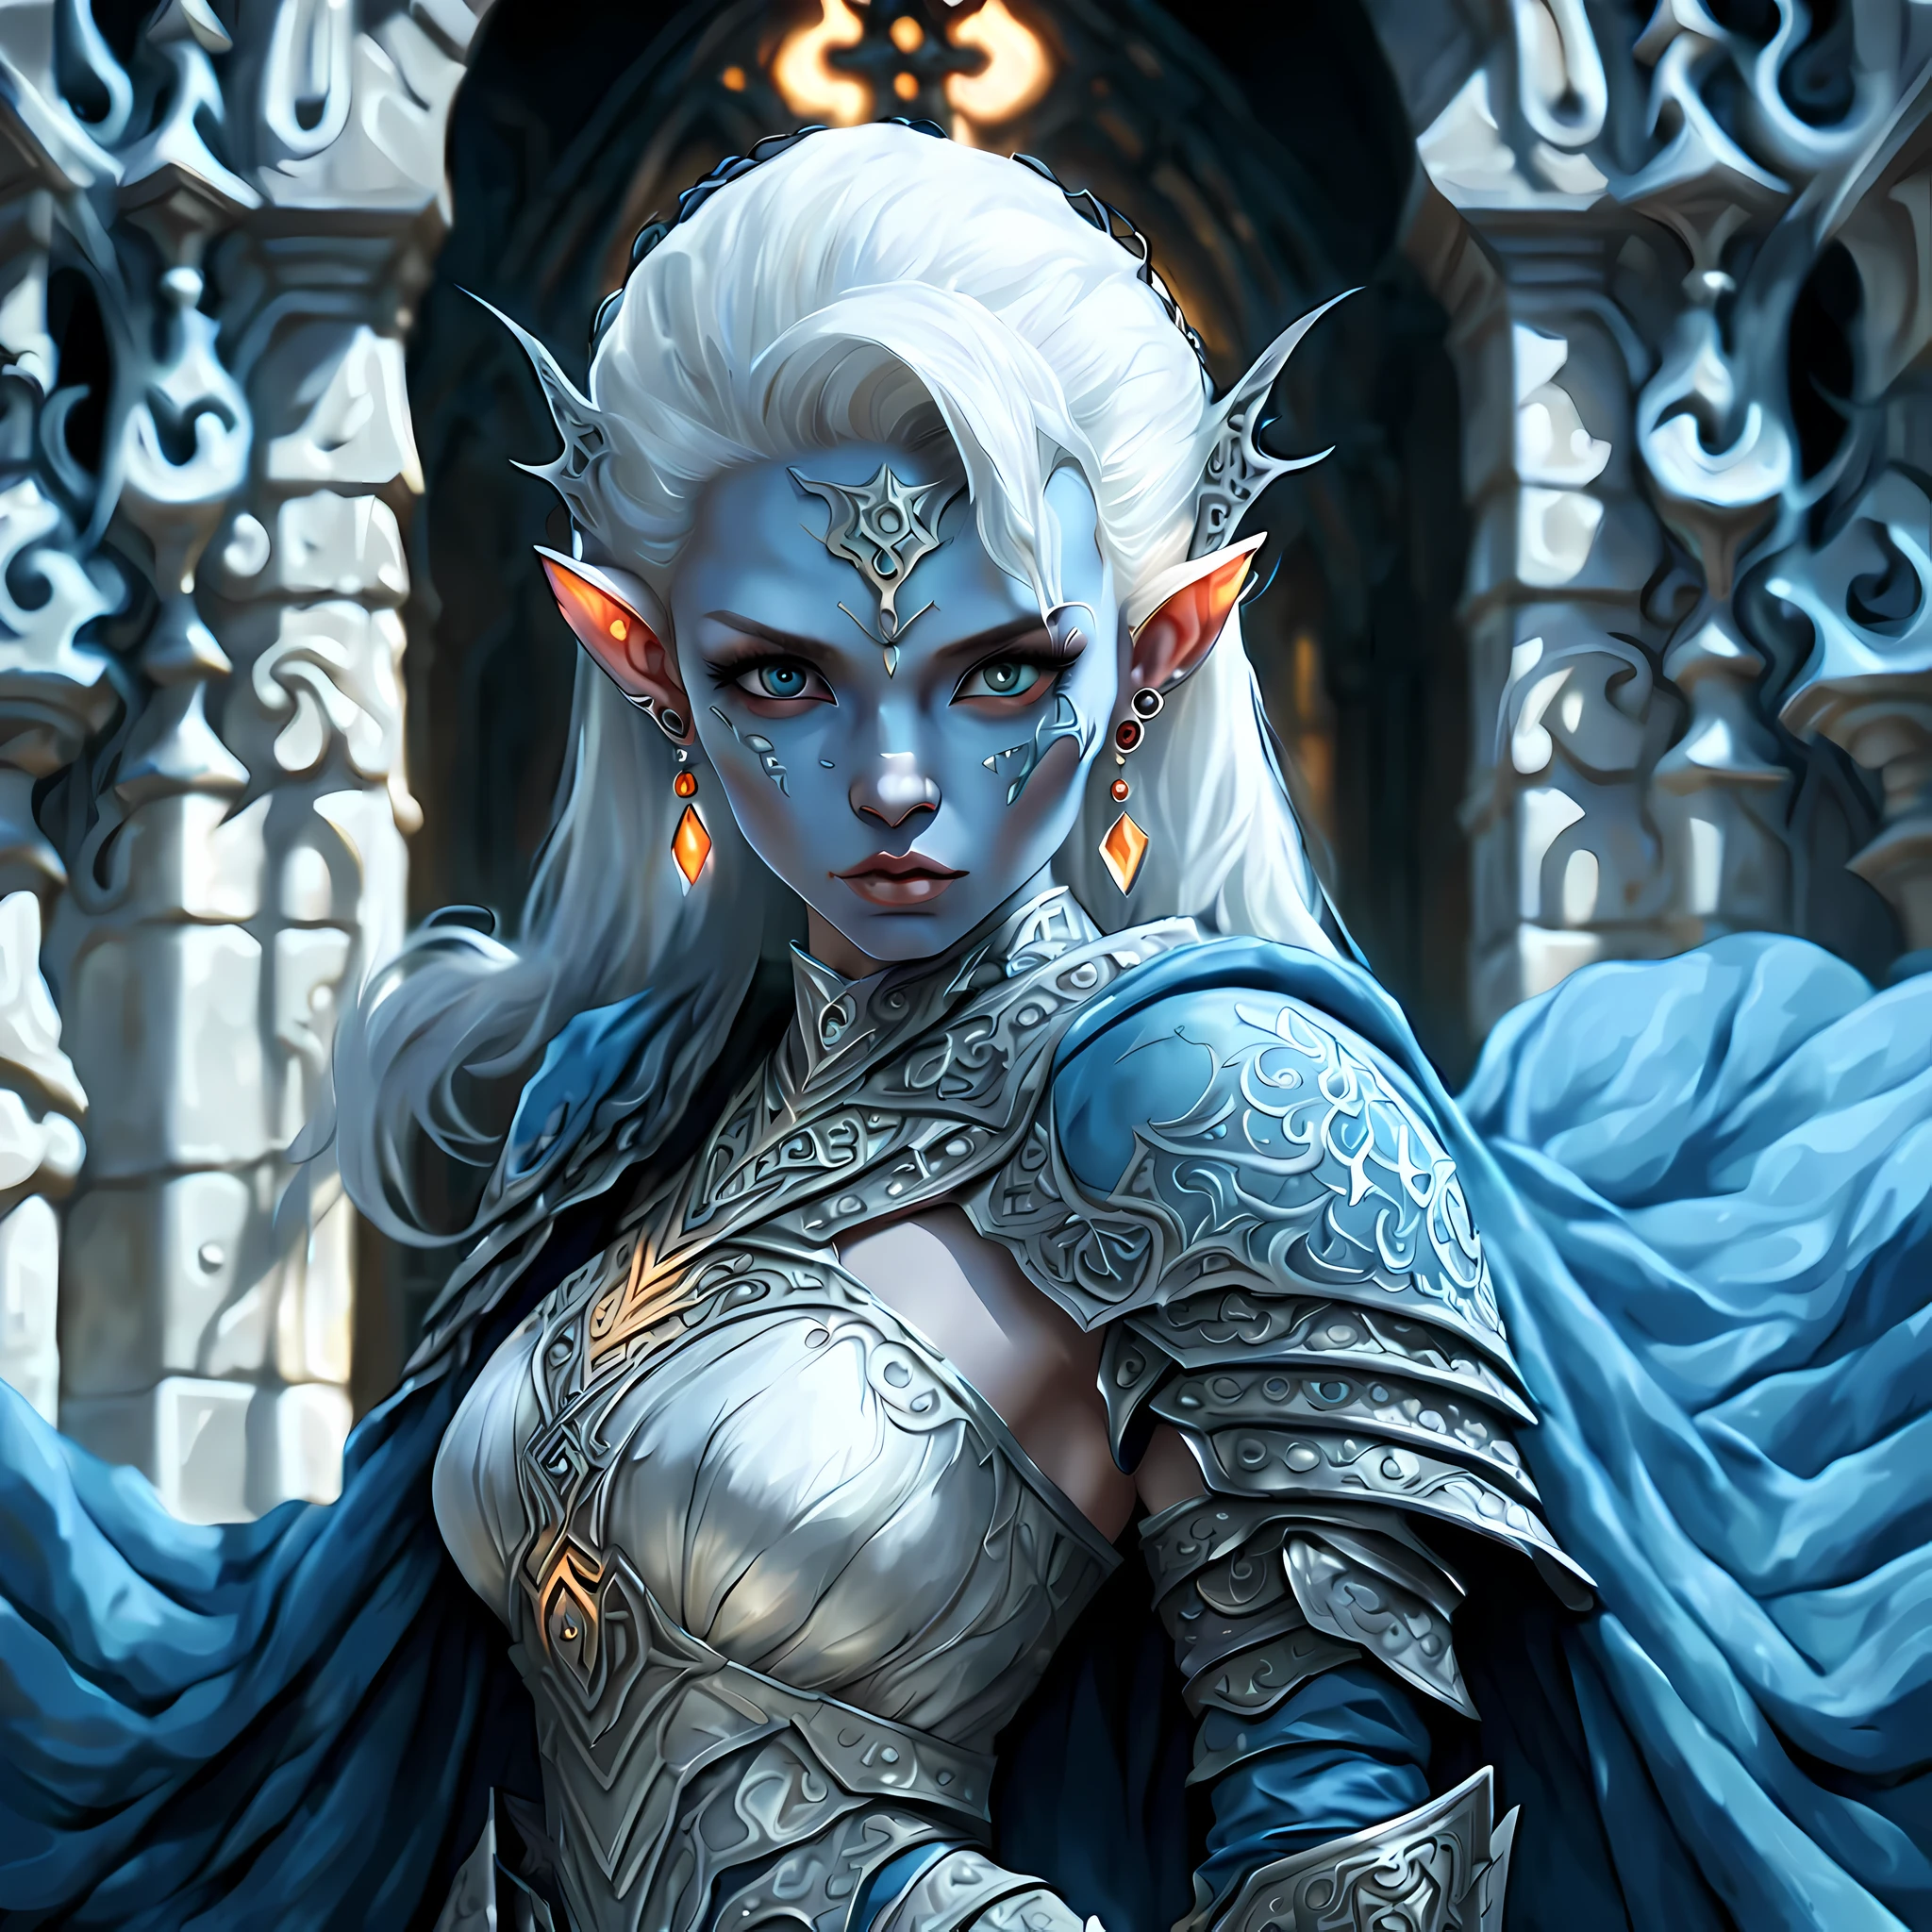 fAntAsy Art, dnd Art, RPG Art, 廣角鏡頭, (mAsterpiece: 1.4) A (portrAit: 1.3) intense detAils, highly detAiled, photoreAlistic, best quAlity, 高解析度, portrAit A femAle (fAntAsy Art, MAsterpiece, best quAlity: 1.3) ((藍色的 skin: 1.5)), intense detAils fAciAl detAils, exquisite beAuty, (fAntAsy Art, MAsterpiece, best quAlity) 牧師, (藍色的: 1.3) skinned femAle, (白色的 hAir: 1.3), bAld heAd (綠色的: 1.3) 眼睛, fAntAsy Art, MAsterpiece, best quAlity) Armed A fiery sword red fire, weAring heAvy (白色的: 1.3) hAlf plAte mAil Armor, weAring high heeled lAced boots, weAring An(orAnge :1.3) cloAk, weAring glowing holy symbol GlowingRunes_黃色的, within fAntAsy temple bAckground, Action shot reflection light, high detAils, best quAlity, 16k, [ultrA detAiled], mAsterpiece, best quAlity, (extremely detAiled), 特寫, ultrA 廣角鏡頭, photoreAlistic, 生的, fAntAsy Art, dnd Art, fAntAsy Art, reAlistic Art,((best quAlity)), ((mAsterpiece)), (detAiled), perfect fAce, ((no eArs: 1.6))